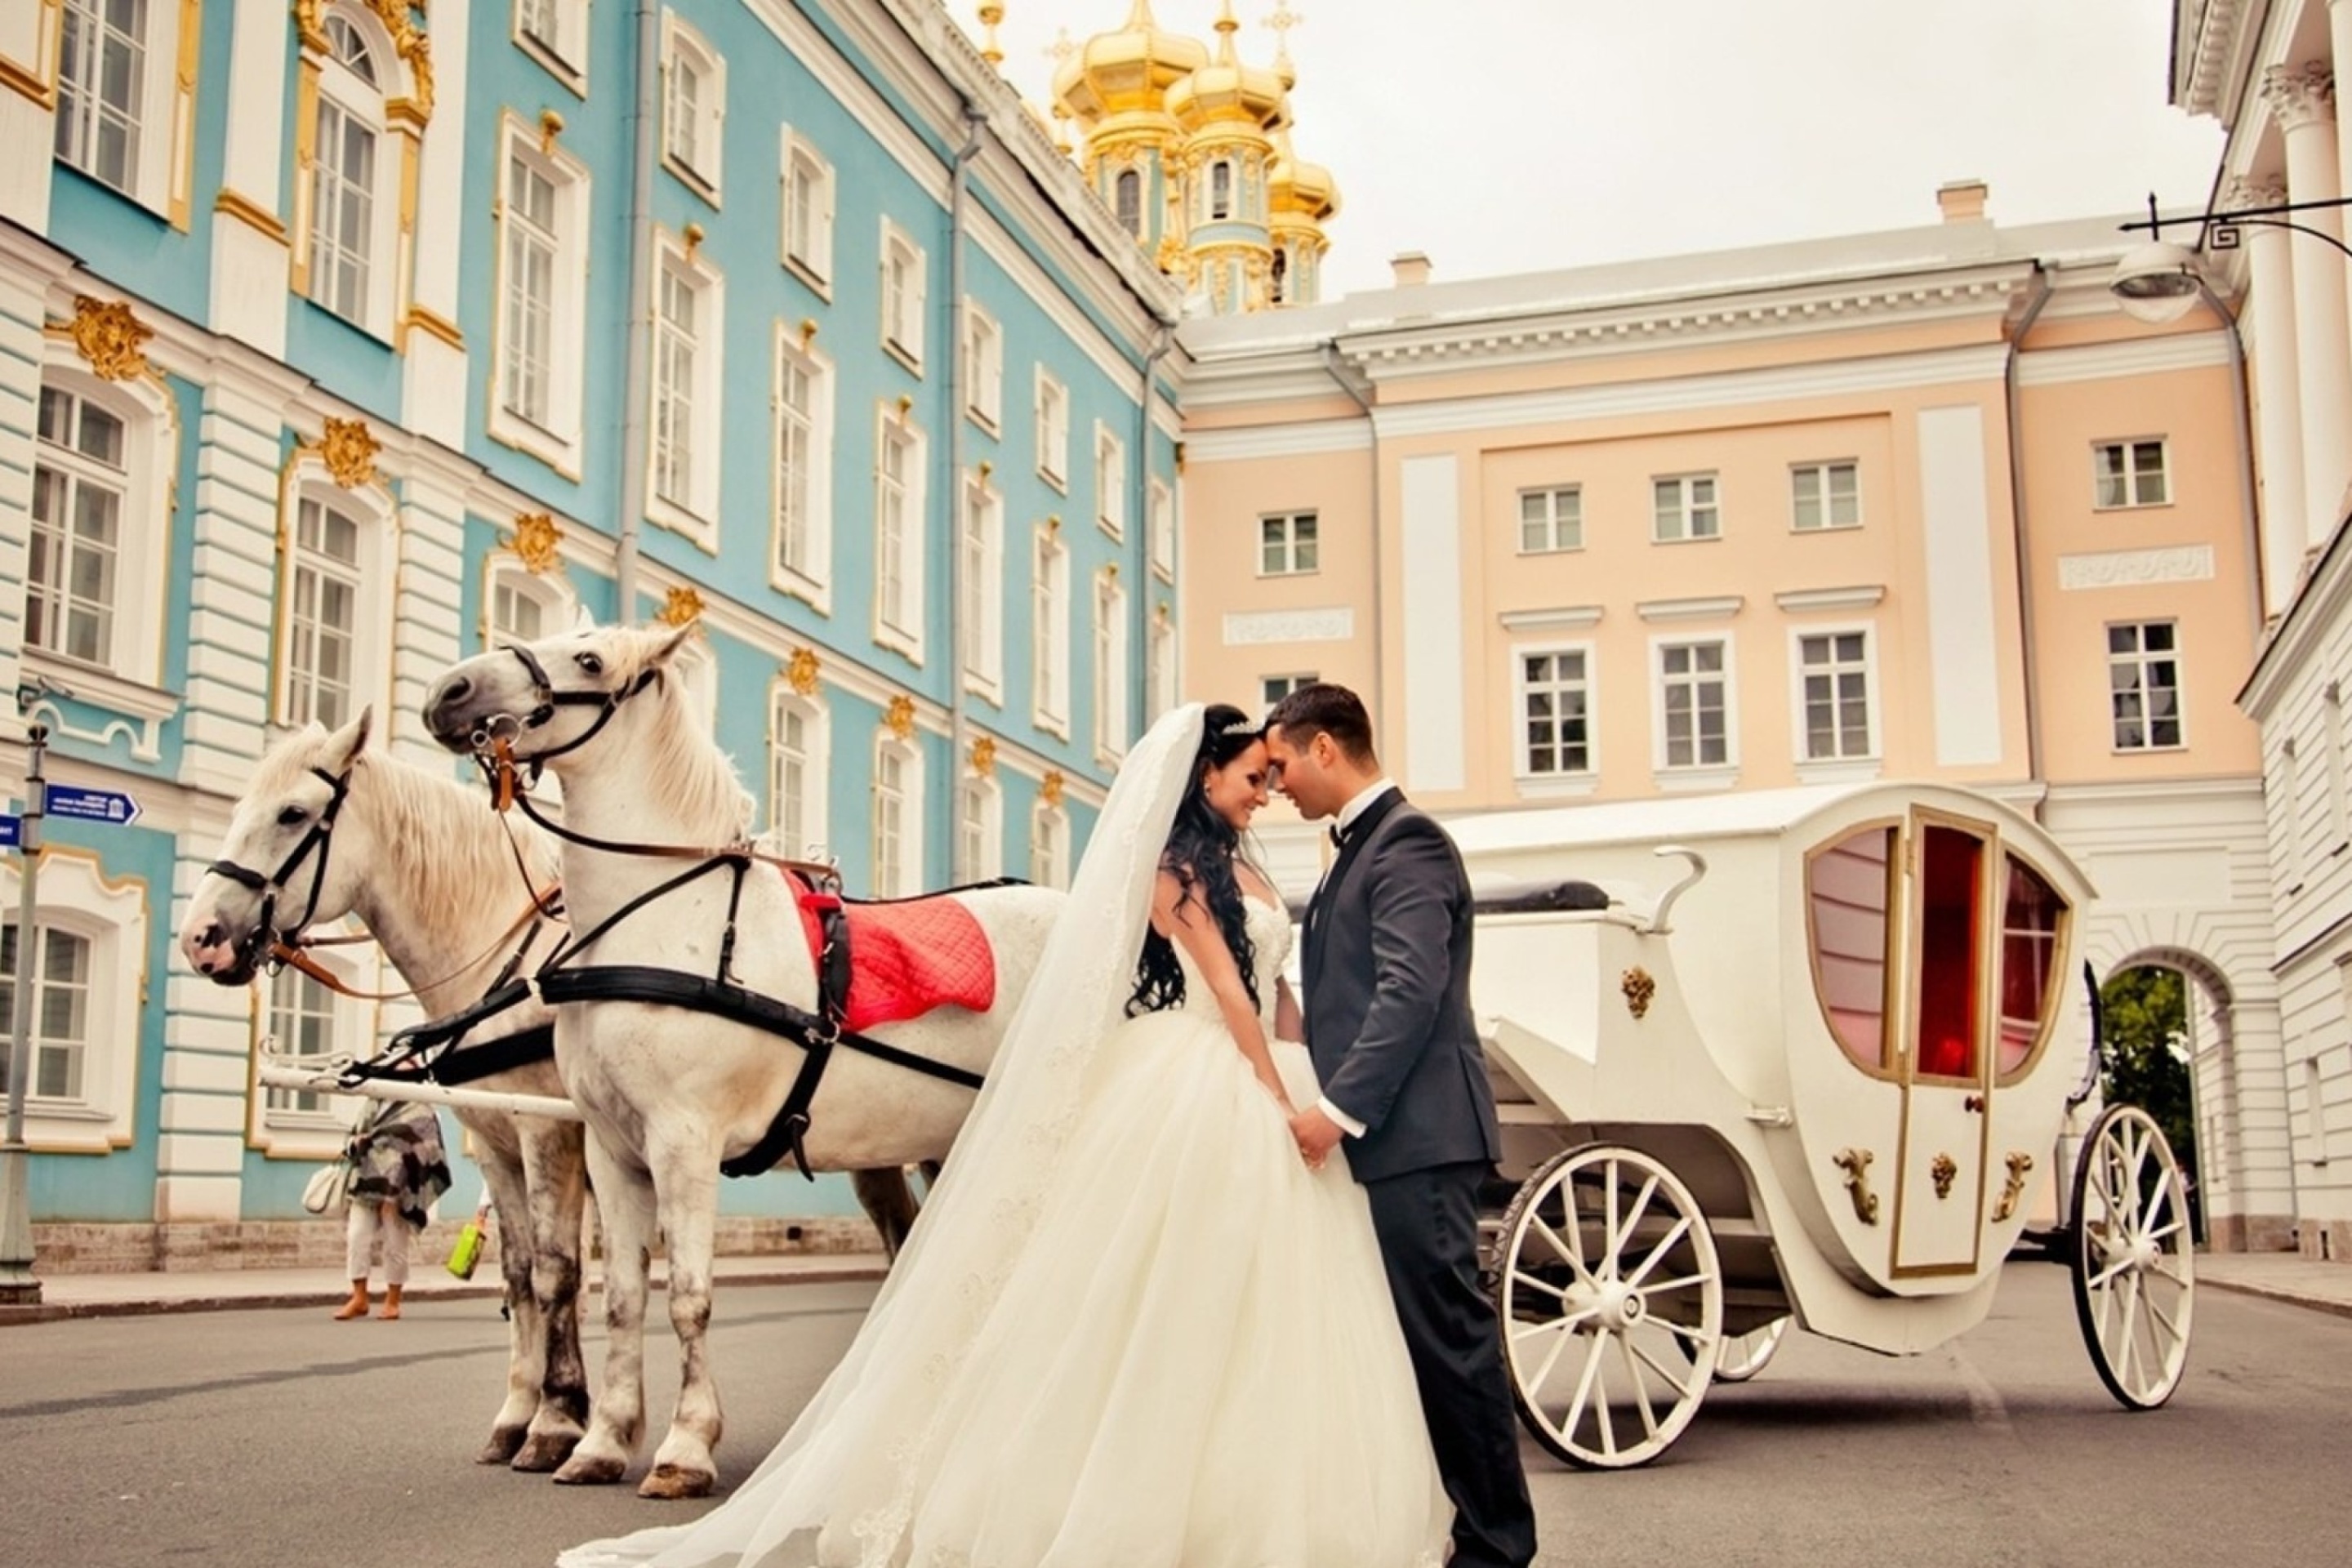 Wedding in carriage wallpaper 2880x1920